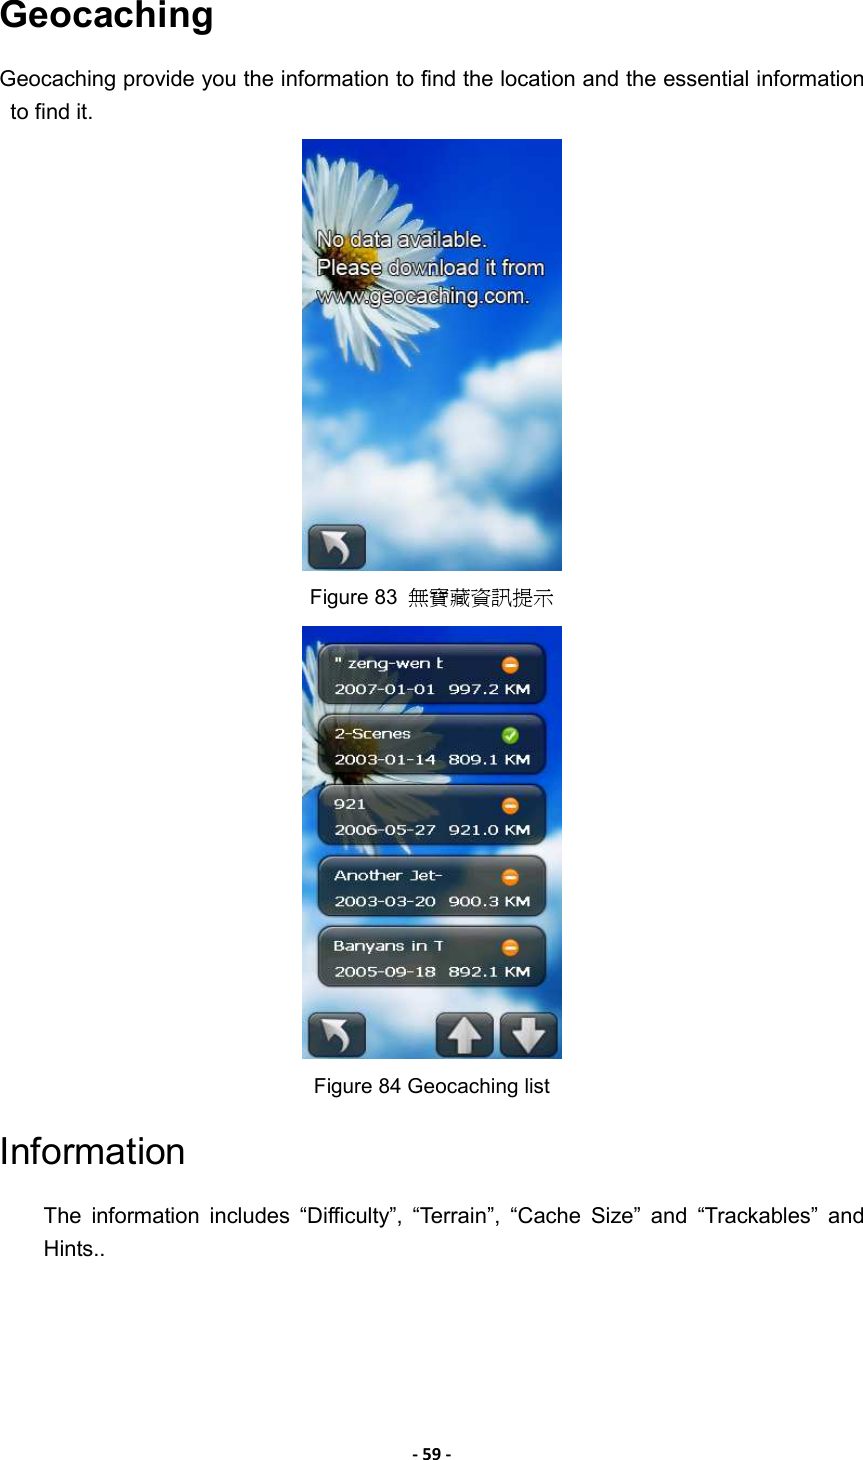 - 59 - Geocaching Geocaching provide you the information to find the location and the essential information to find it.    Figure 83  無寶藏資訊提示  Figure 84 Geocaching list Information The  information  includes  “Difficulty”,  “Terrain”,  “Cache  Size”  and  “Trackables”  and Hints..   